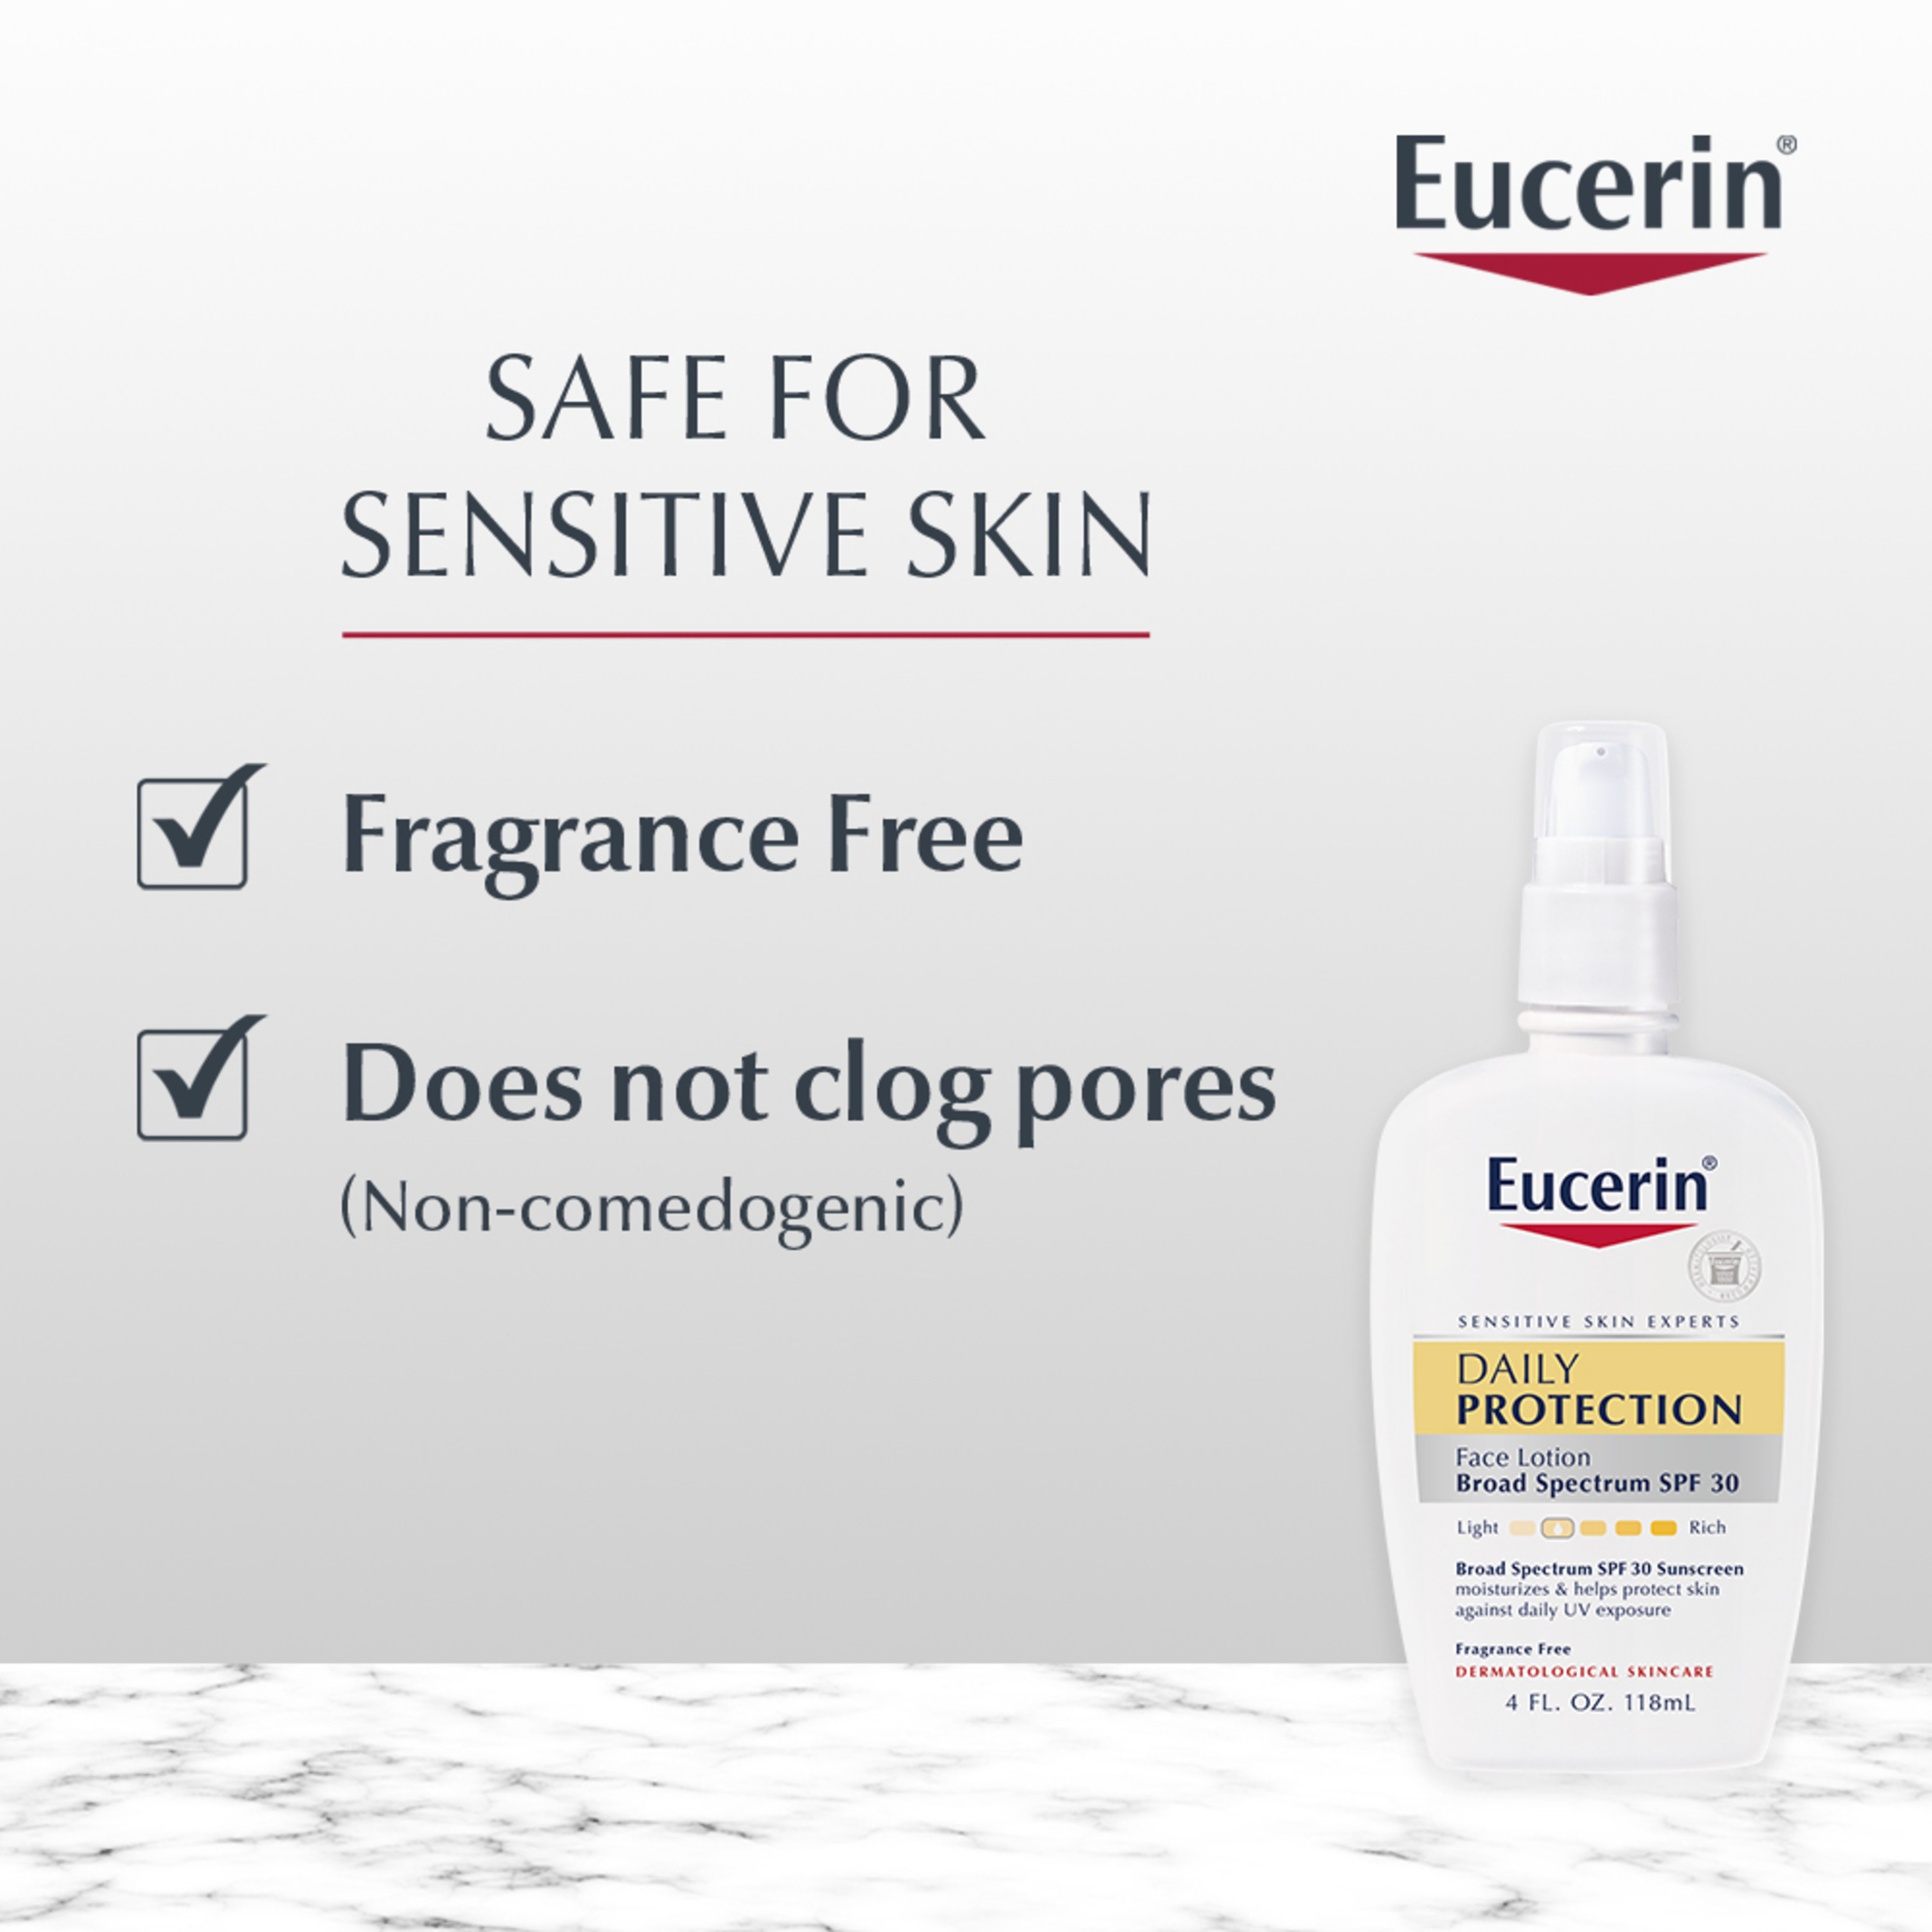 Eucerin Daily Protection Face Lotion with SPF 30, For Sensitive Skin, 4 Fl. Oz. Bottle - image 4 of 8